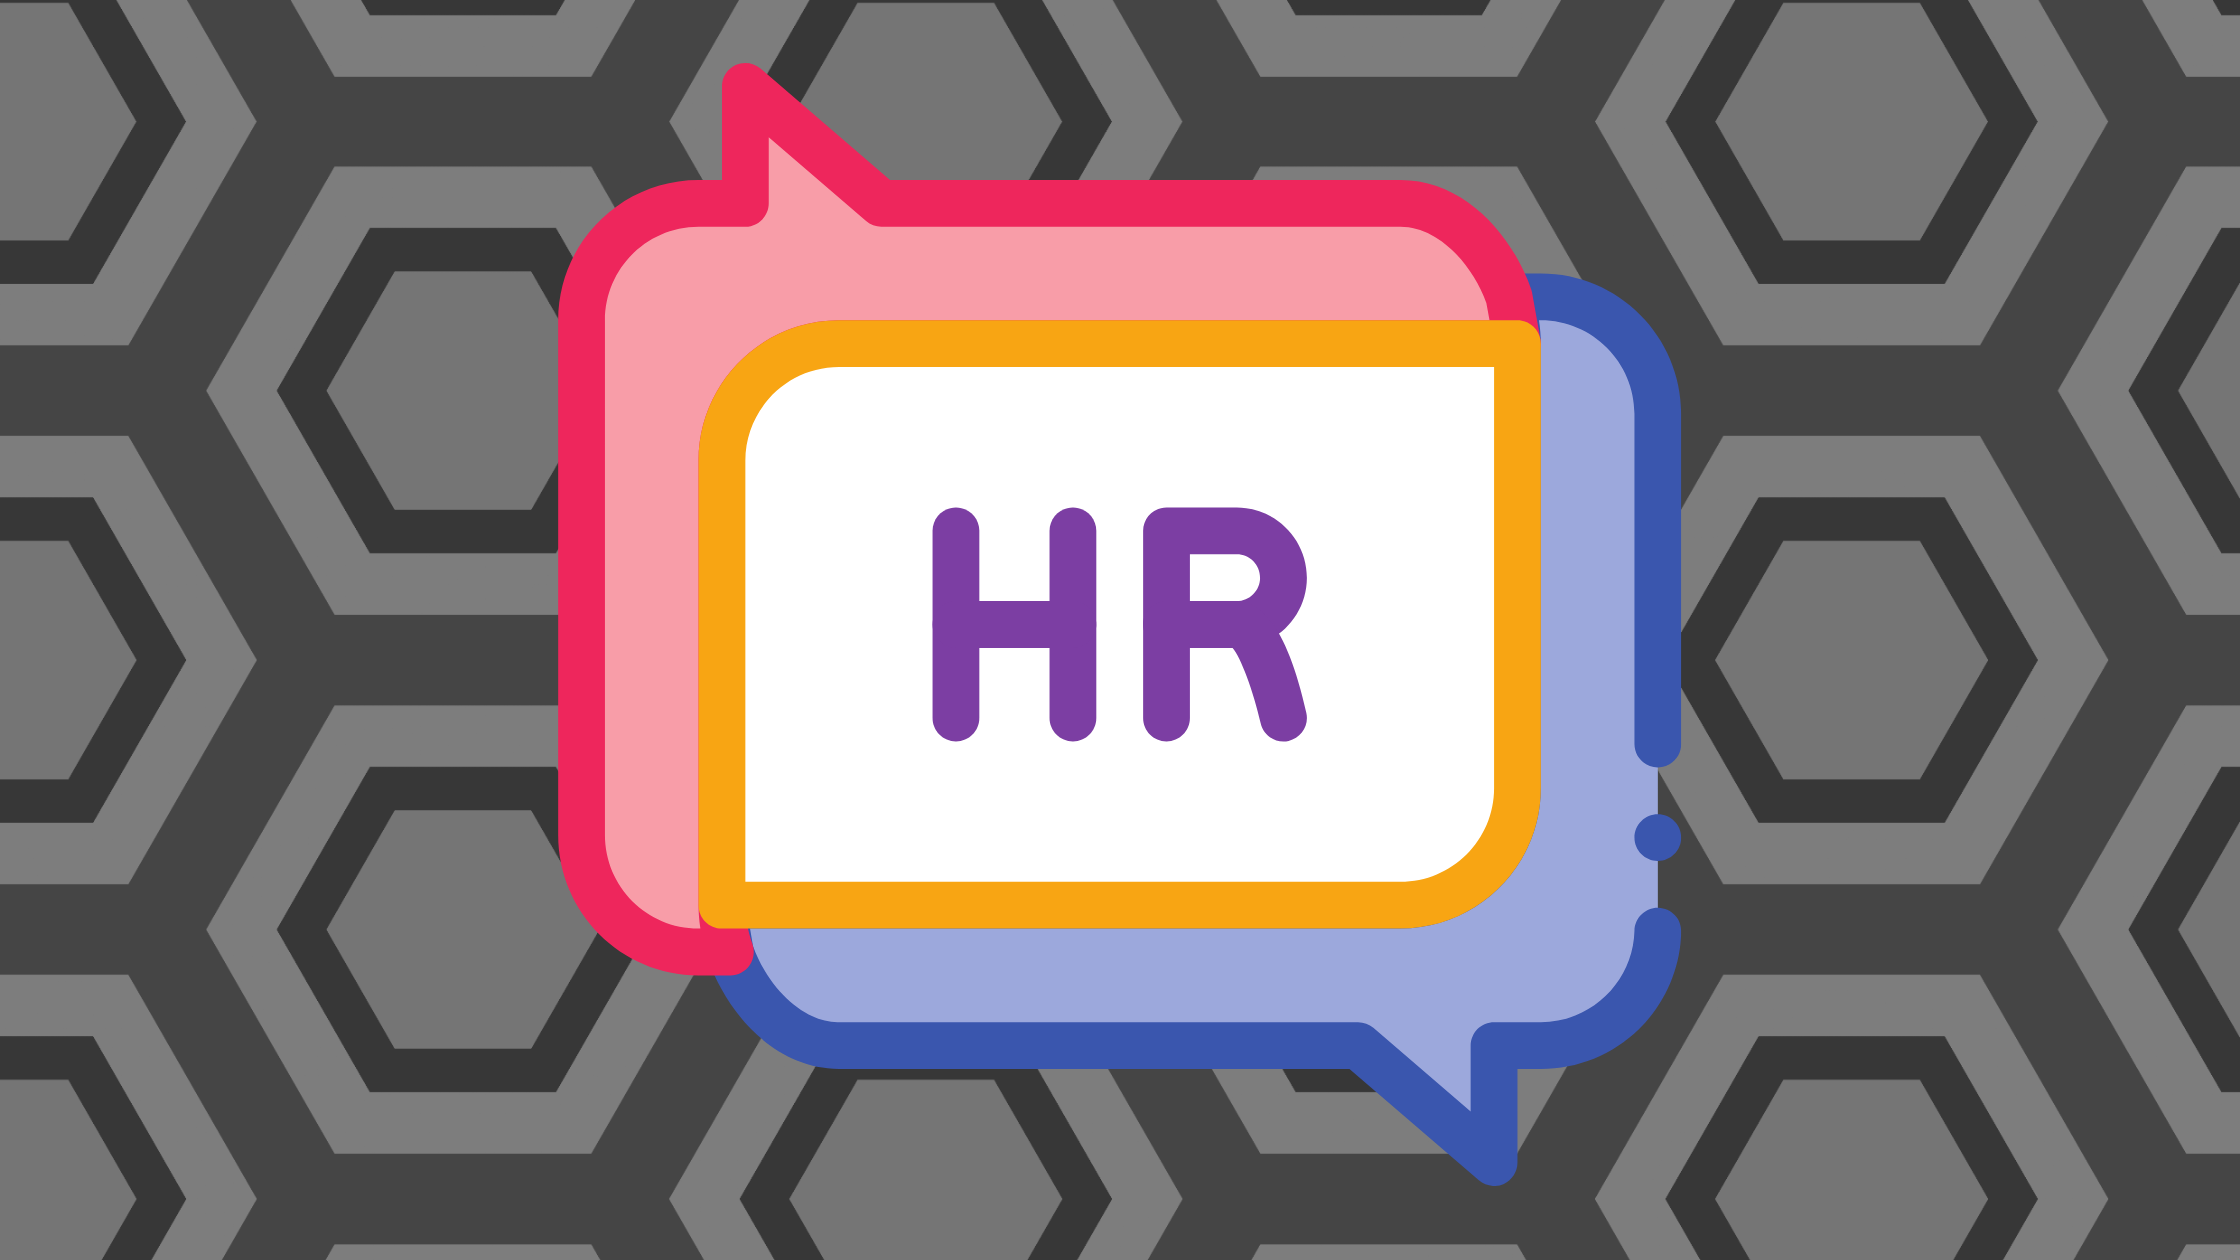 Functions of HR